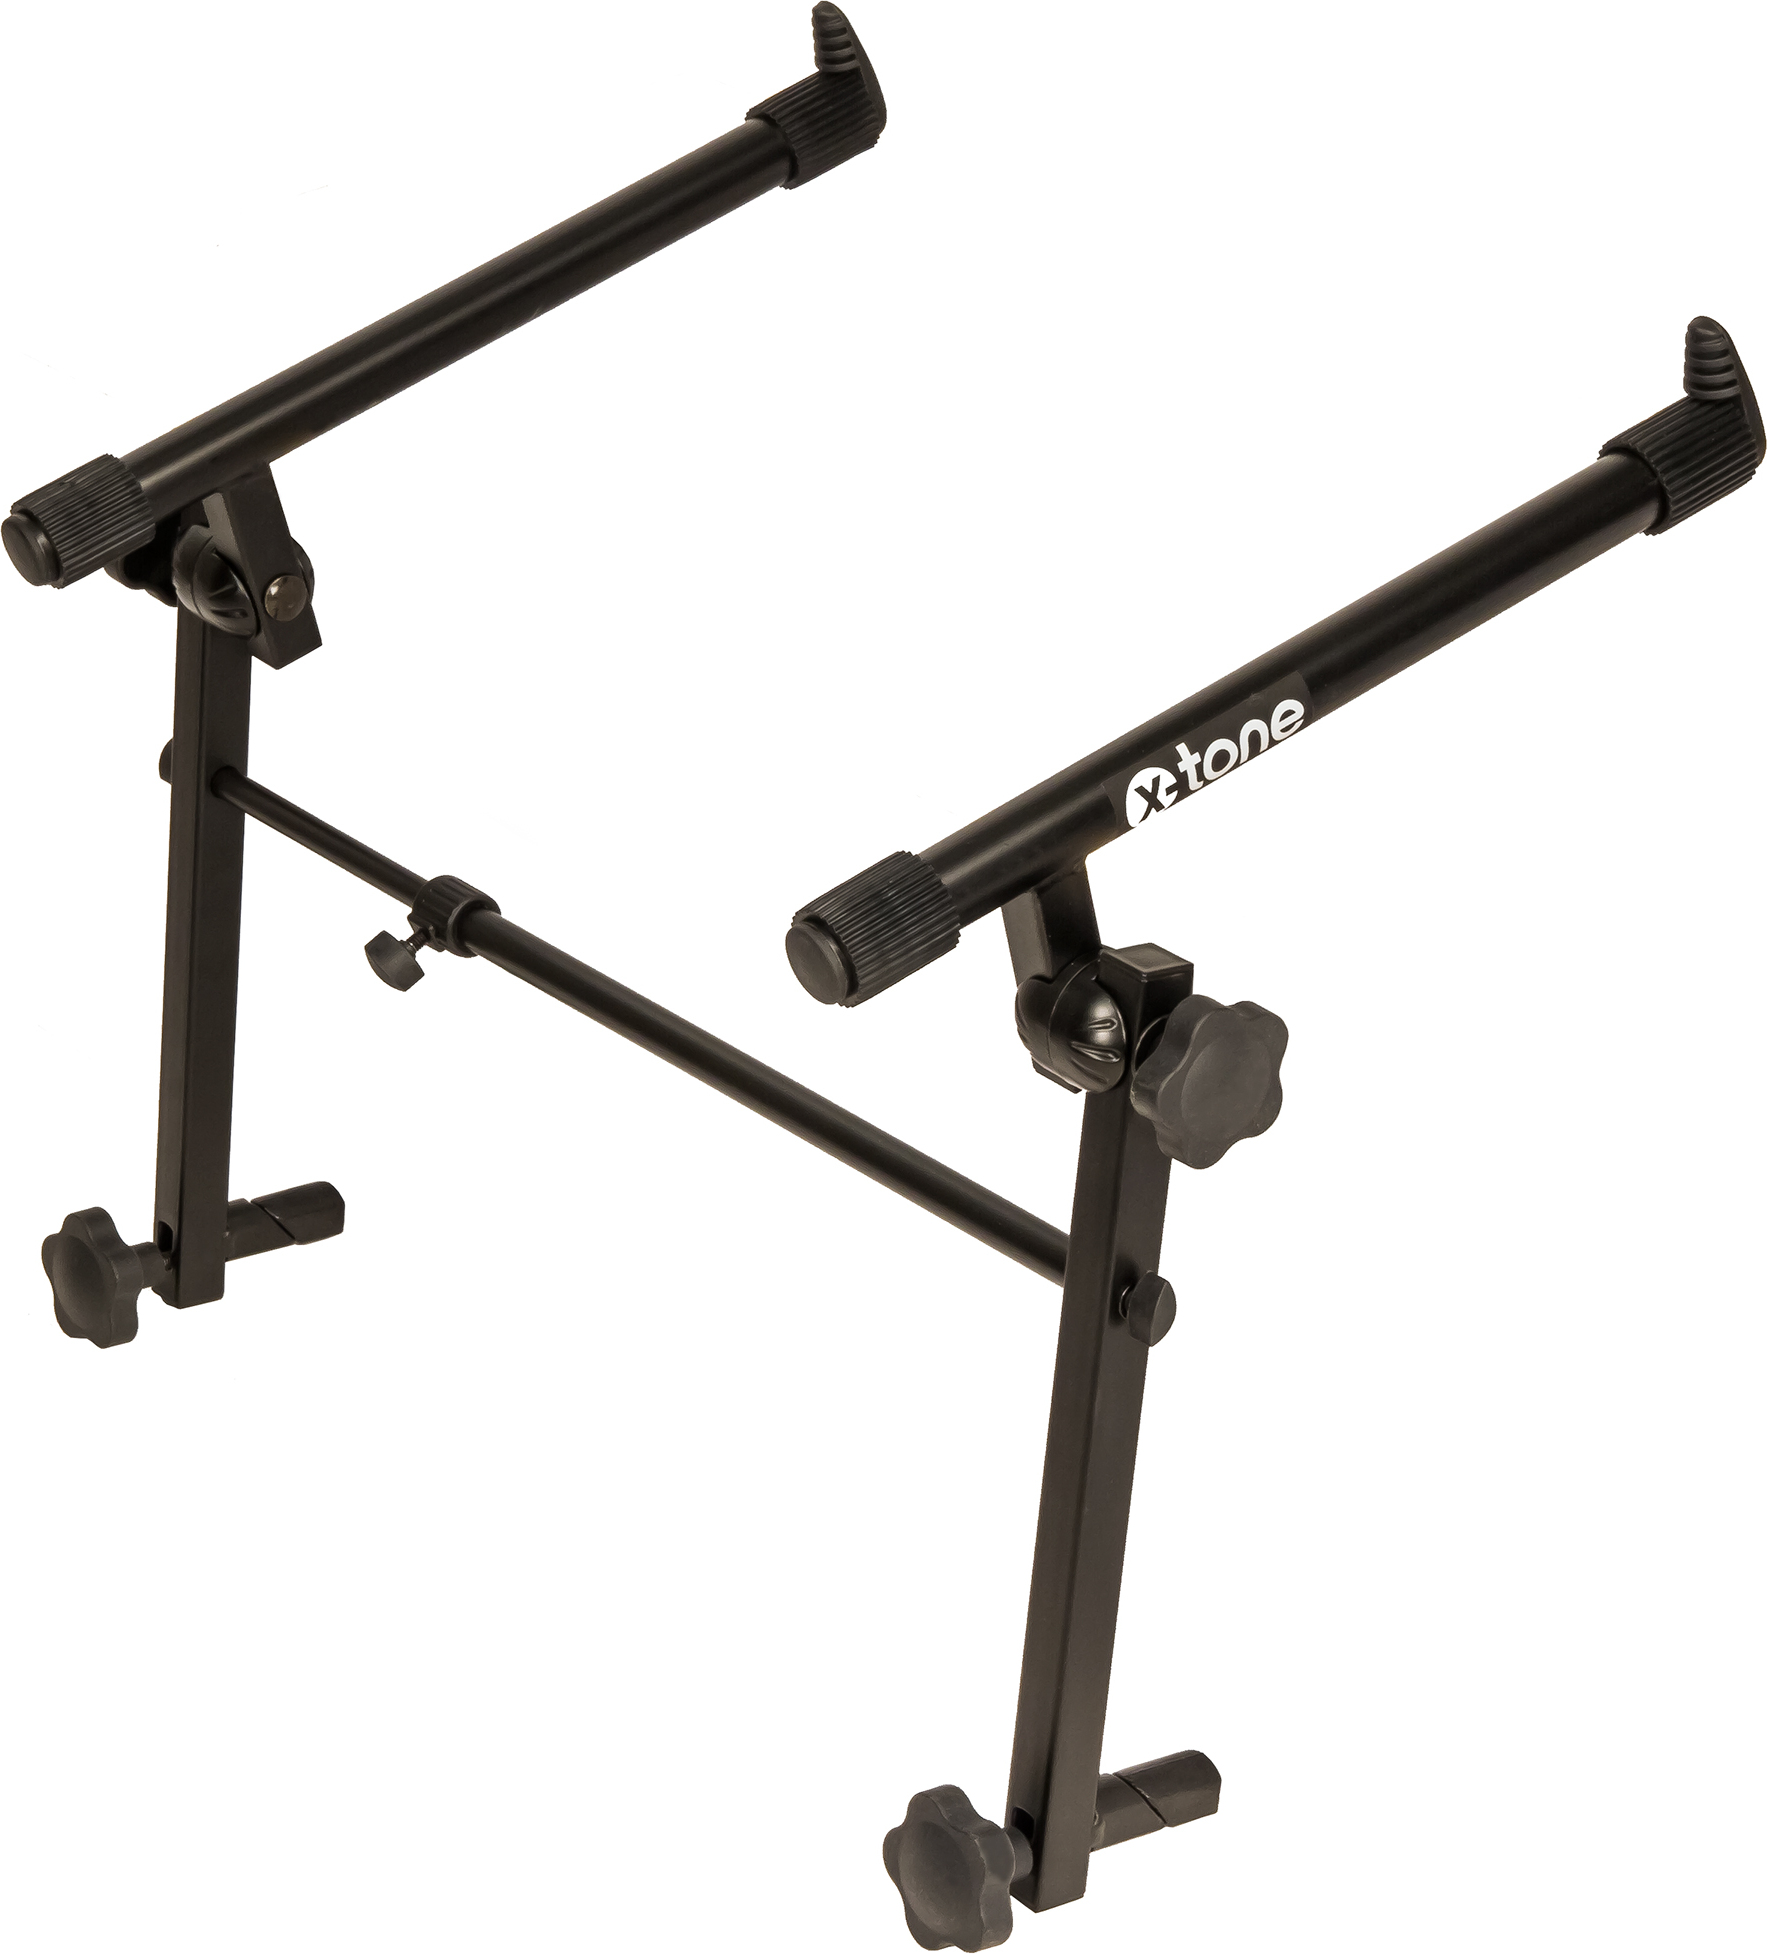 X-tone Xh6110 Extension Stand Clavier Premium - Keyboard Stand - Main picture